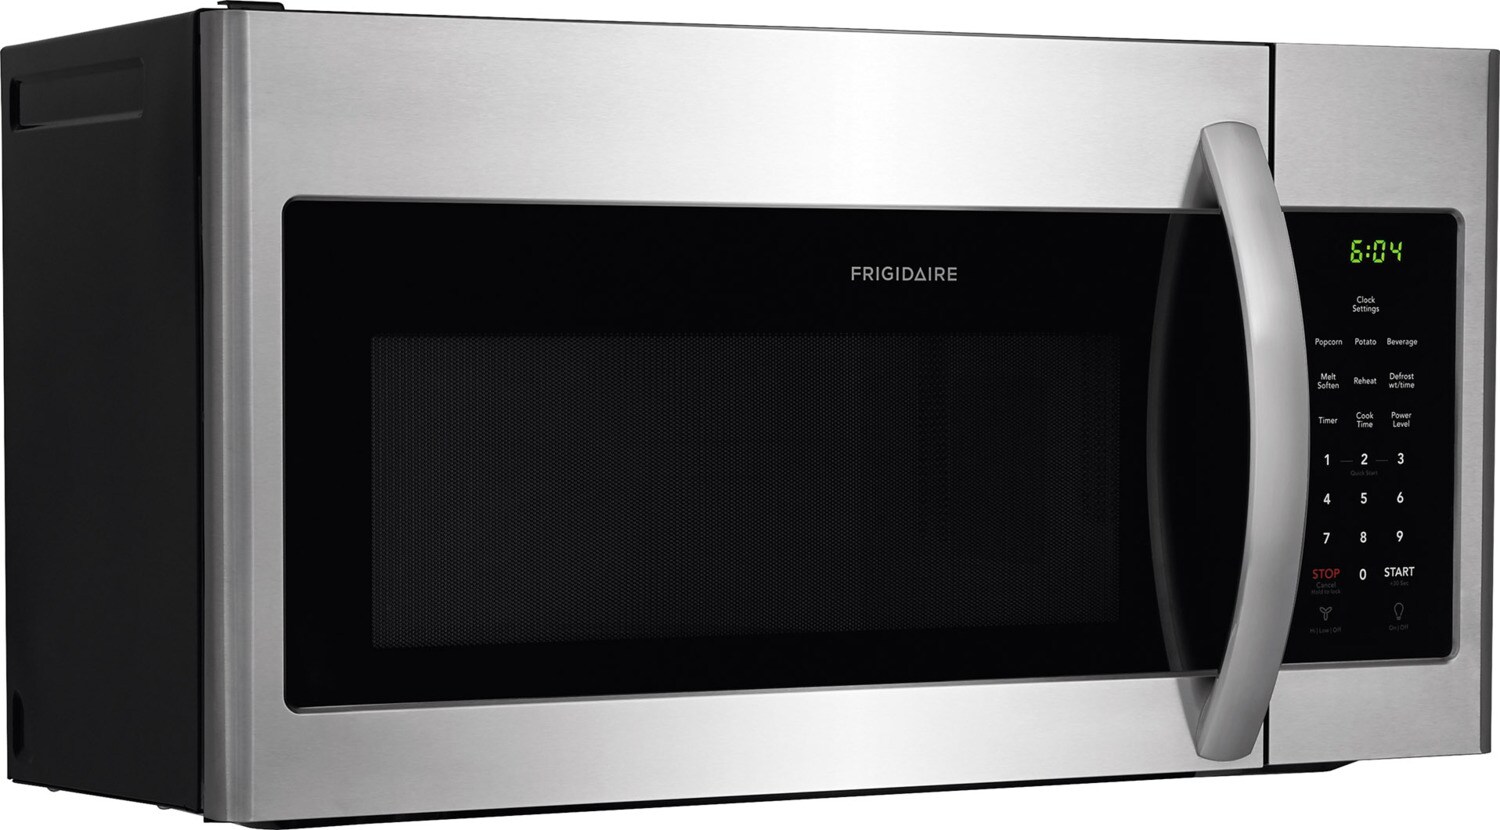 Frigidaire Stainless Steel Over-the-Range Microwave (1.6 Cu. Ft